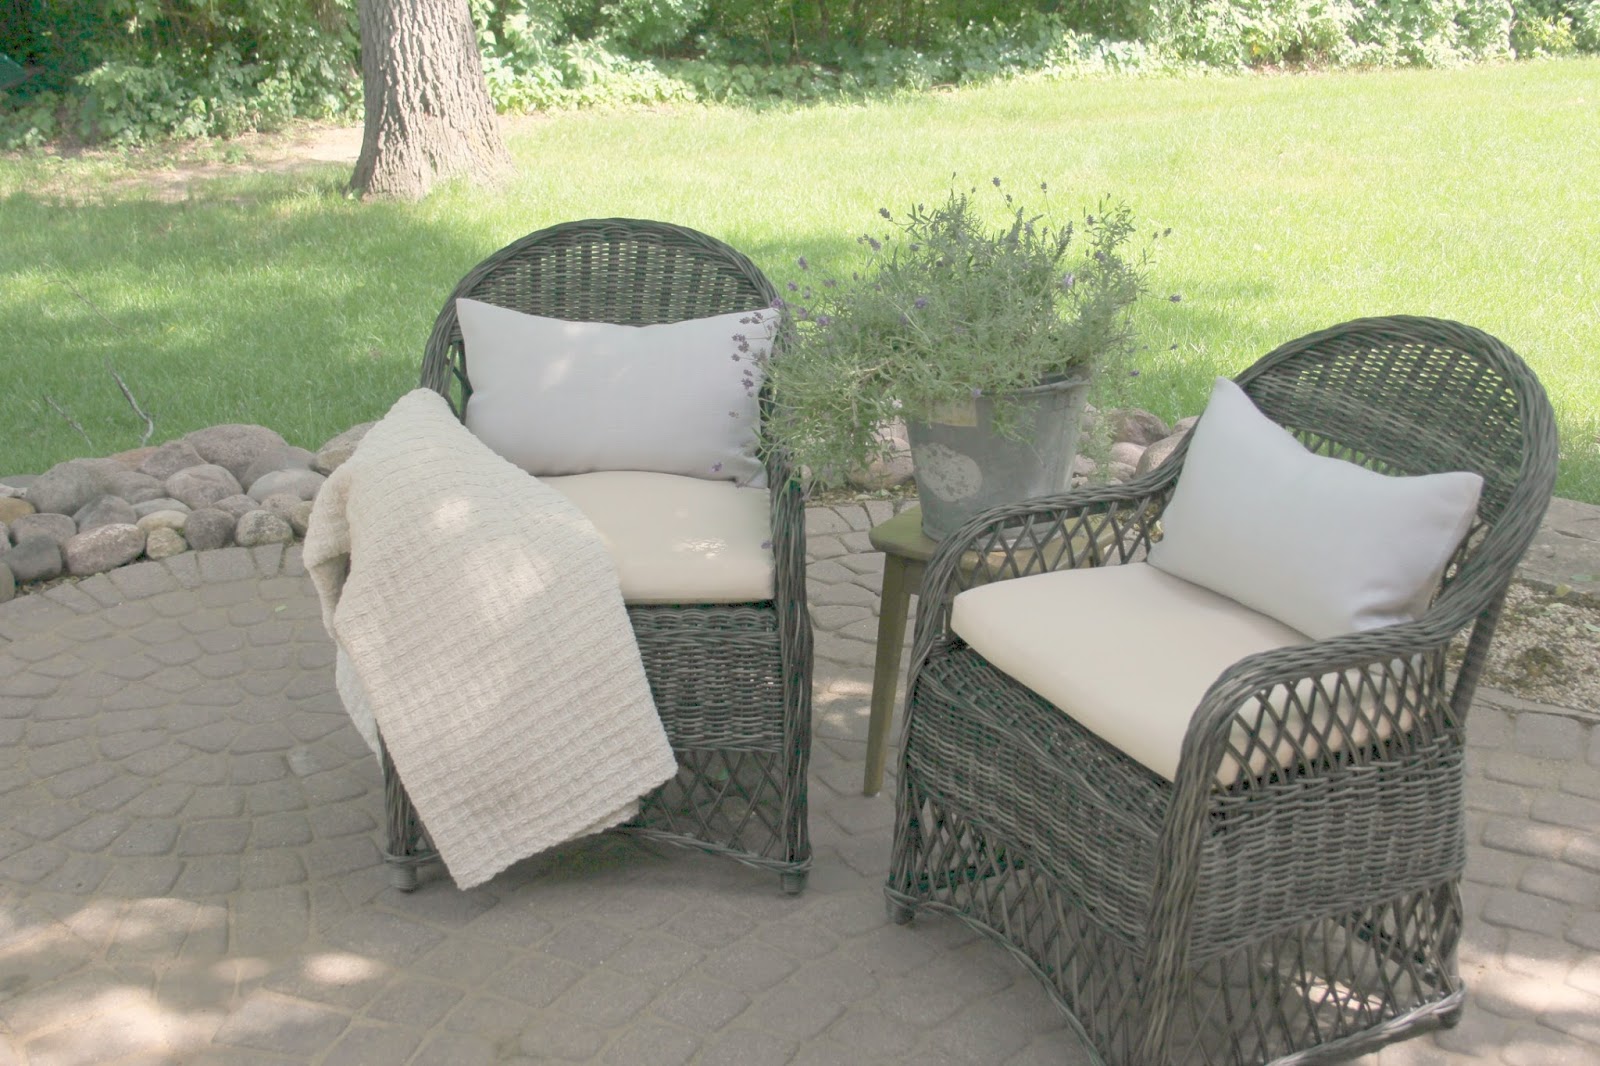 Rattan chairs on patio with RH pillows - Hello Lovely Studio. Come see renovation photos in Before & After: My Home Renovation.